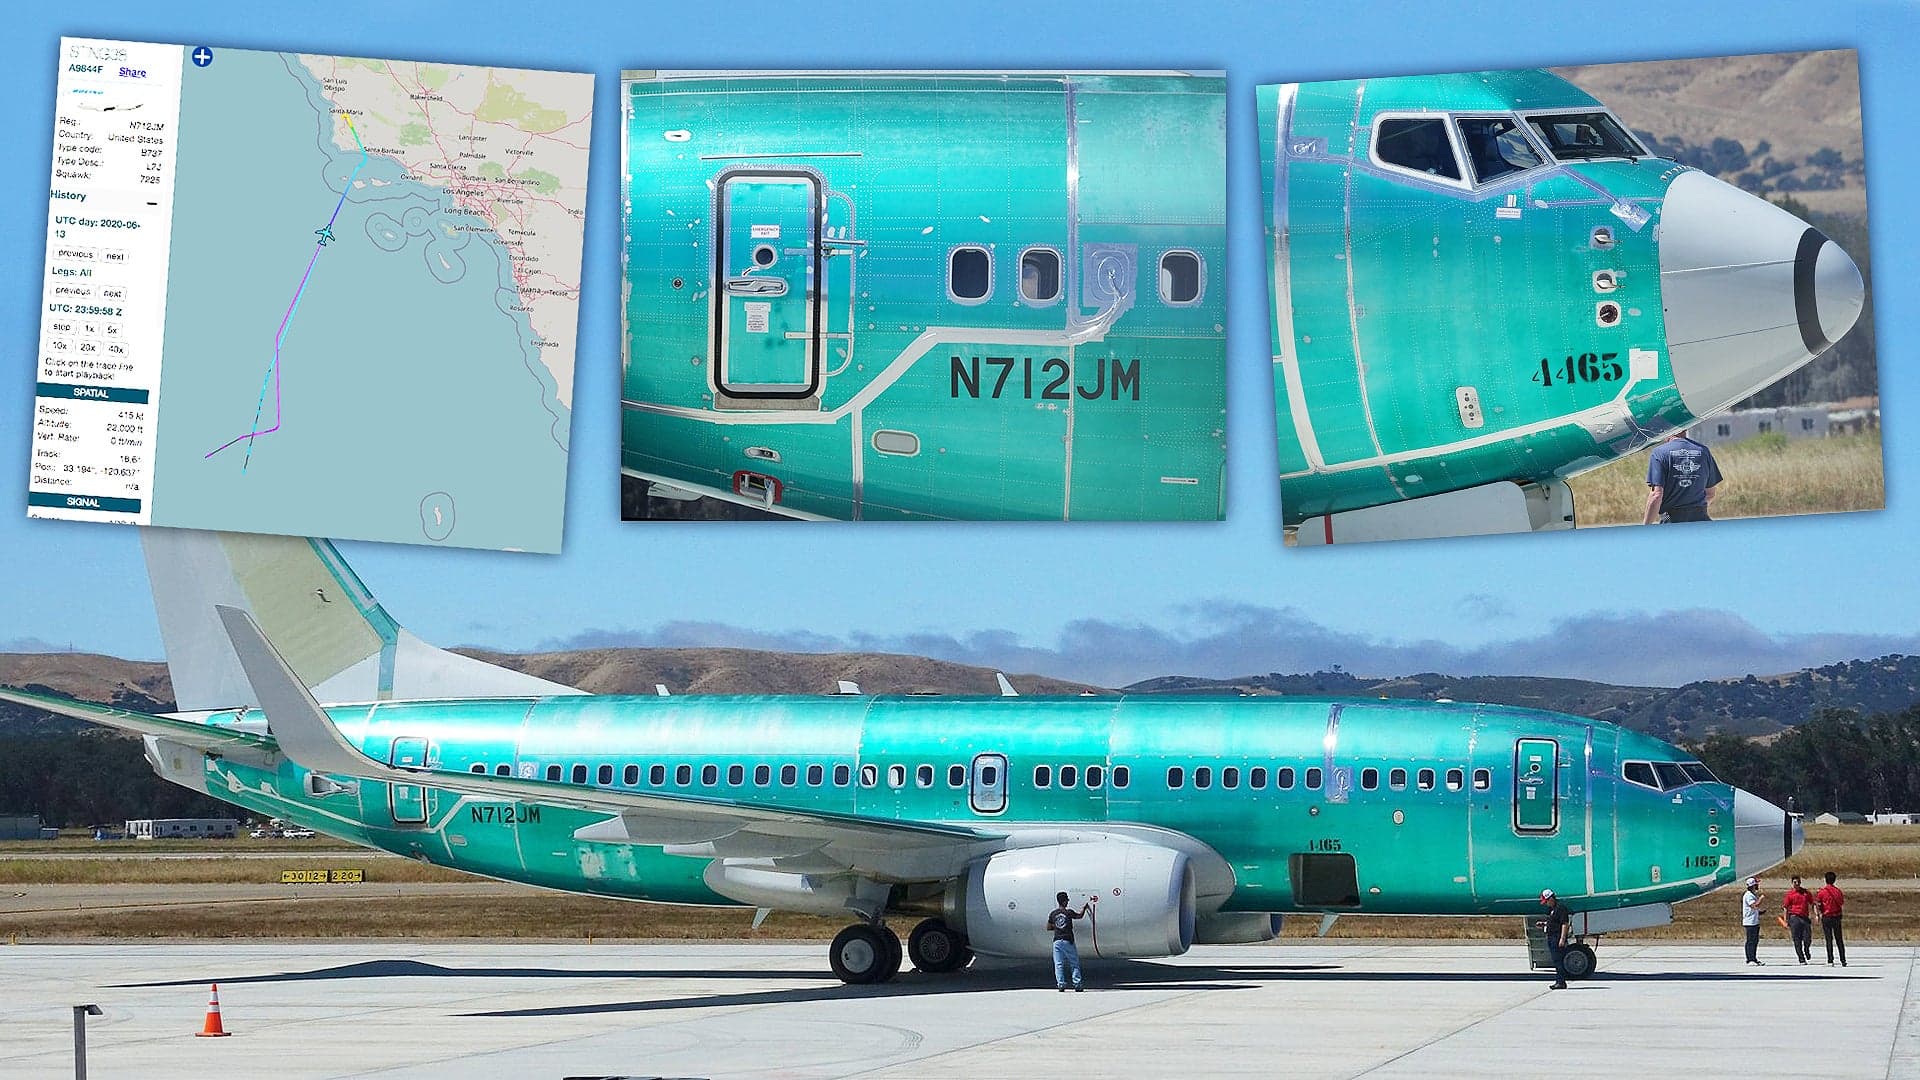 The Mysterious Case Of The Air Force’s New Strangely Modified 737 With A Puzzling Past